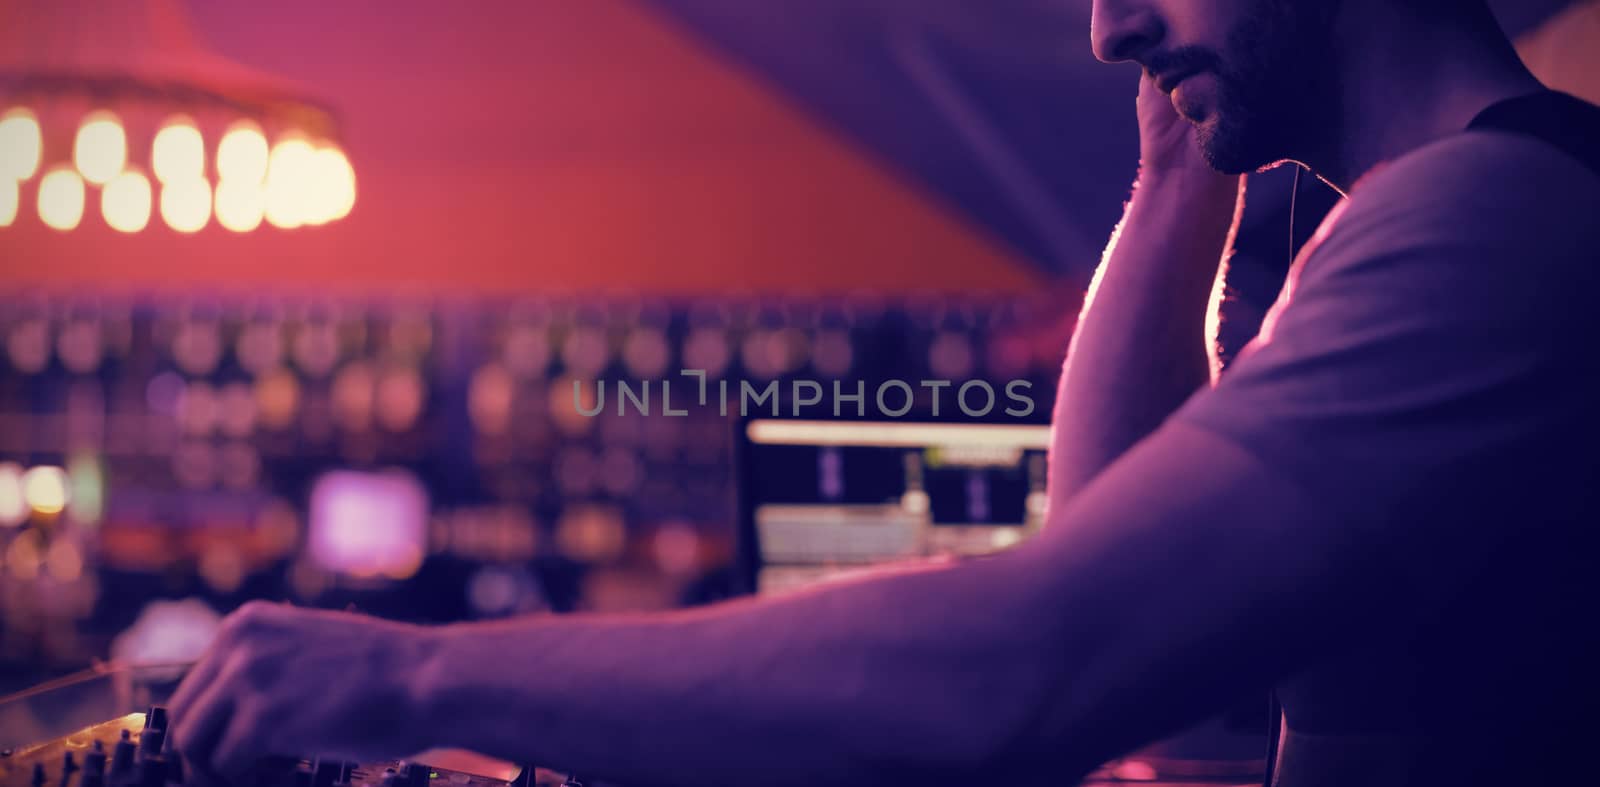 Male dj listening to headphones while playing music in bar